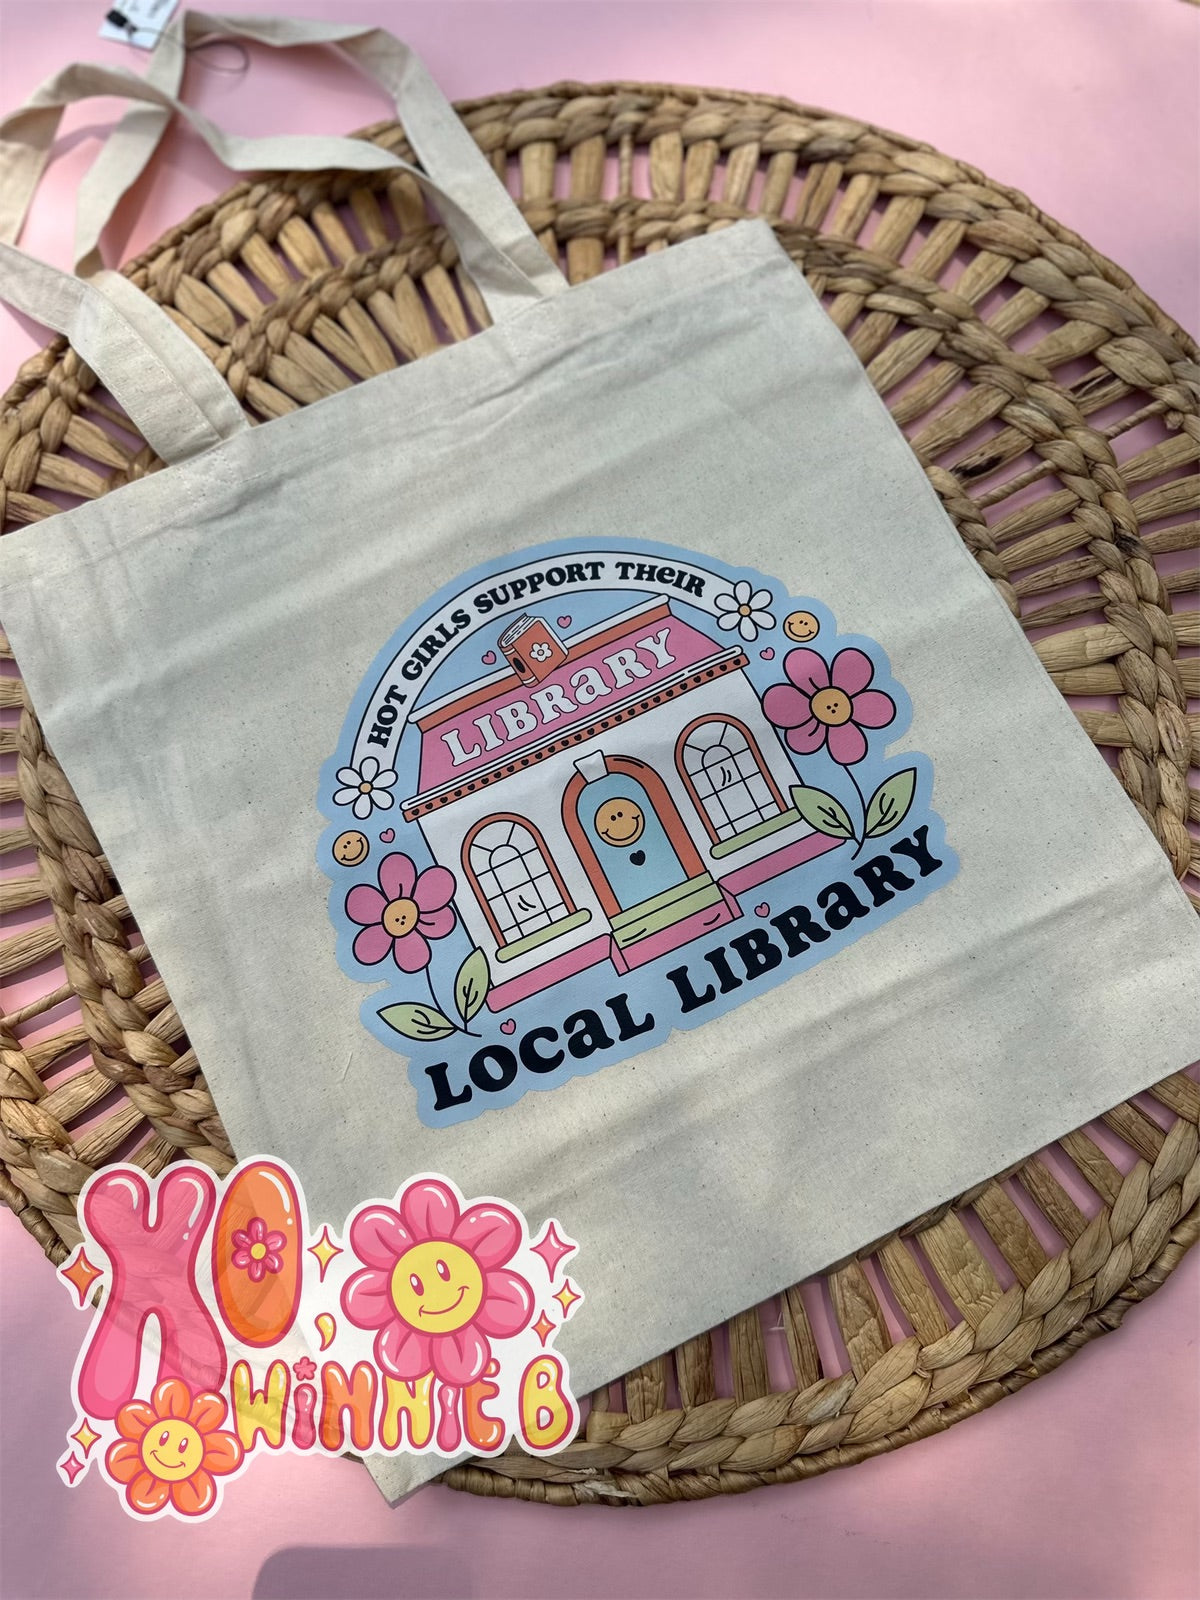 Local Library Market Tote